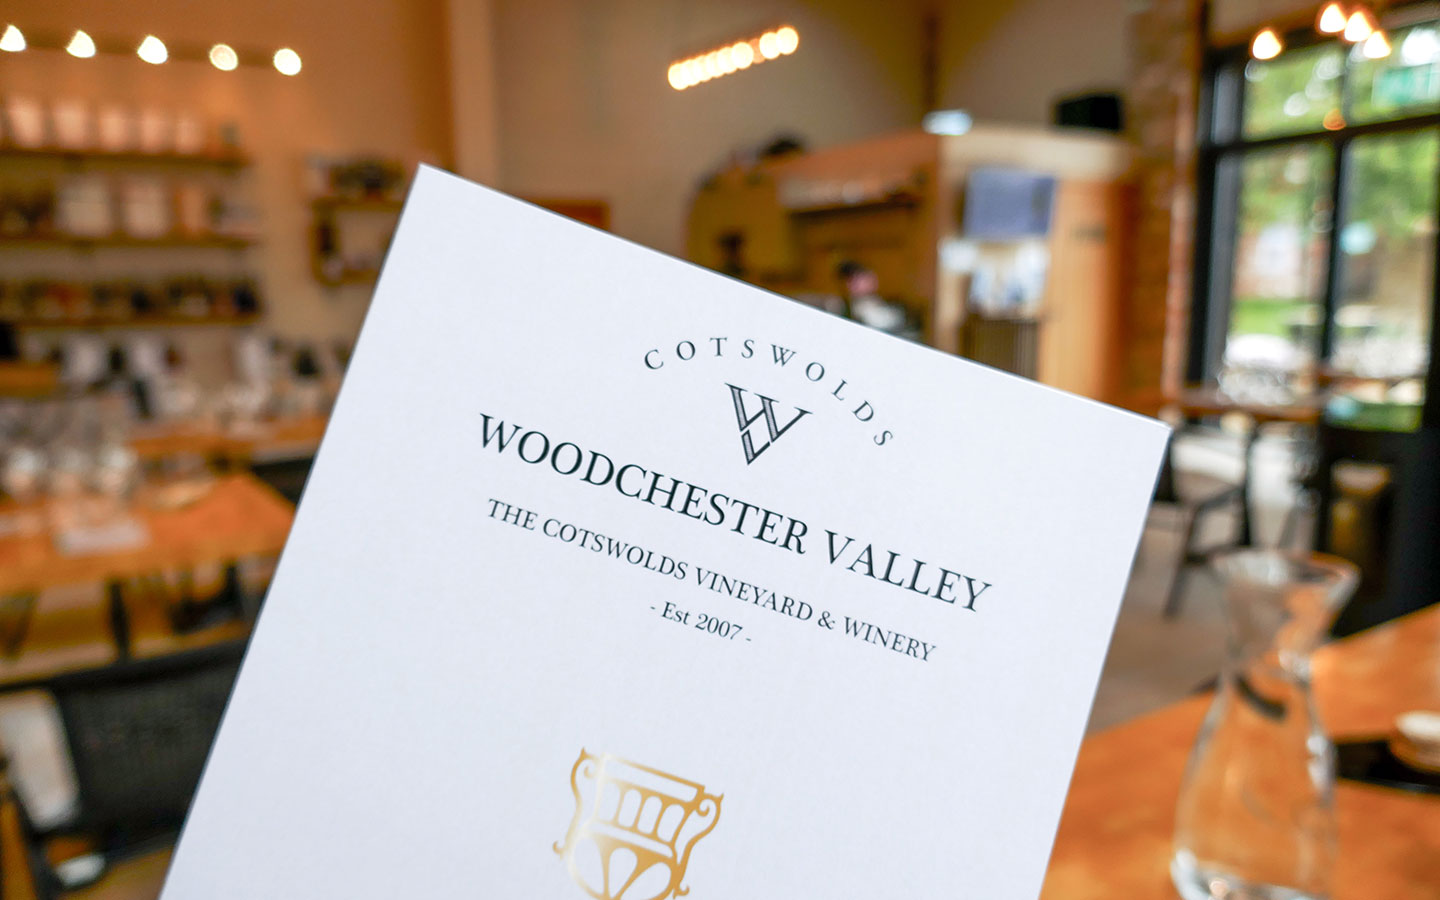 A Cotswolds wine tasting and tour at Woodchester Valley Vineyard